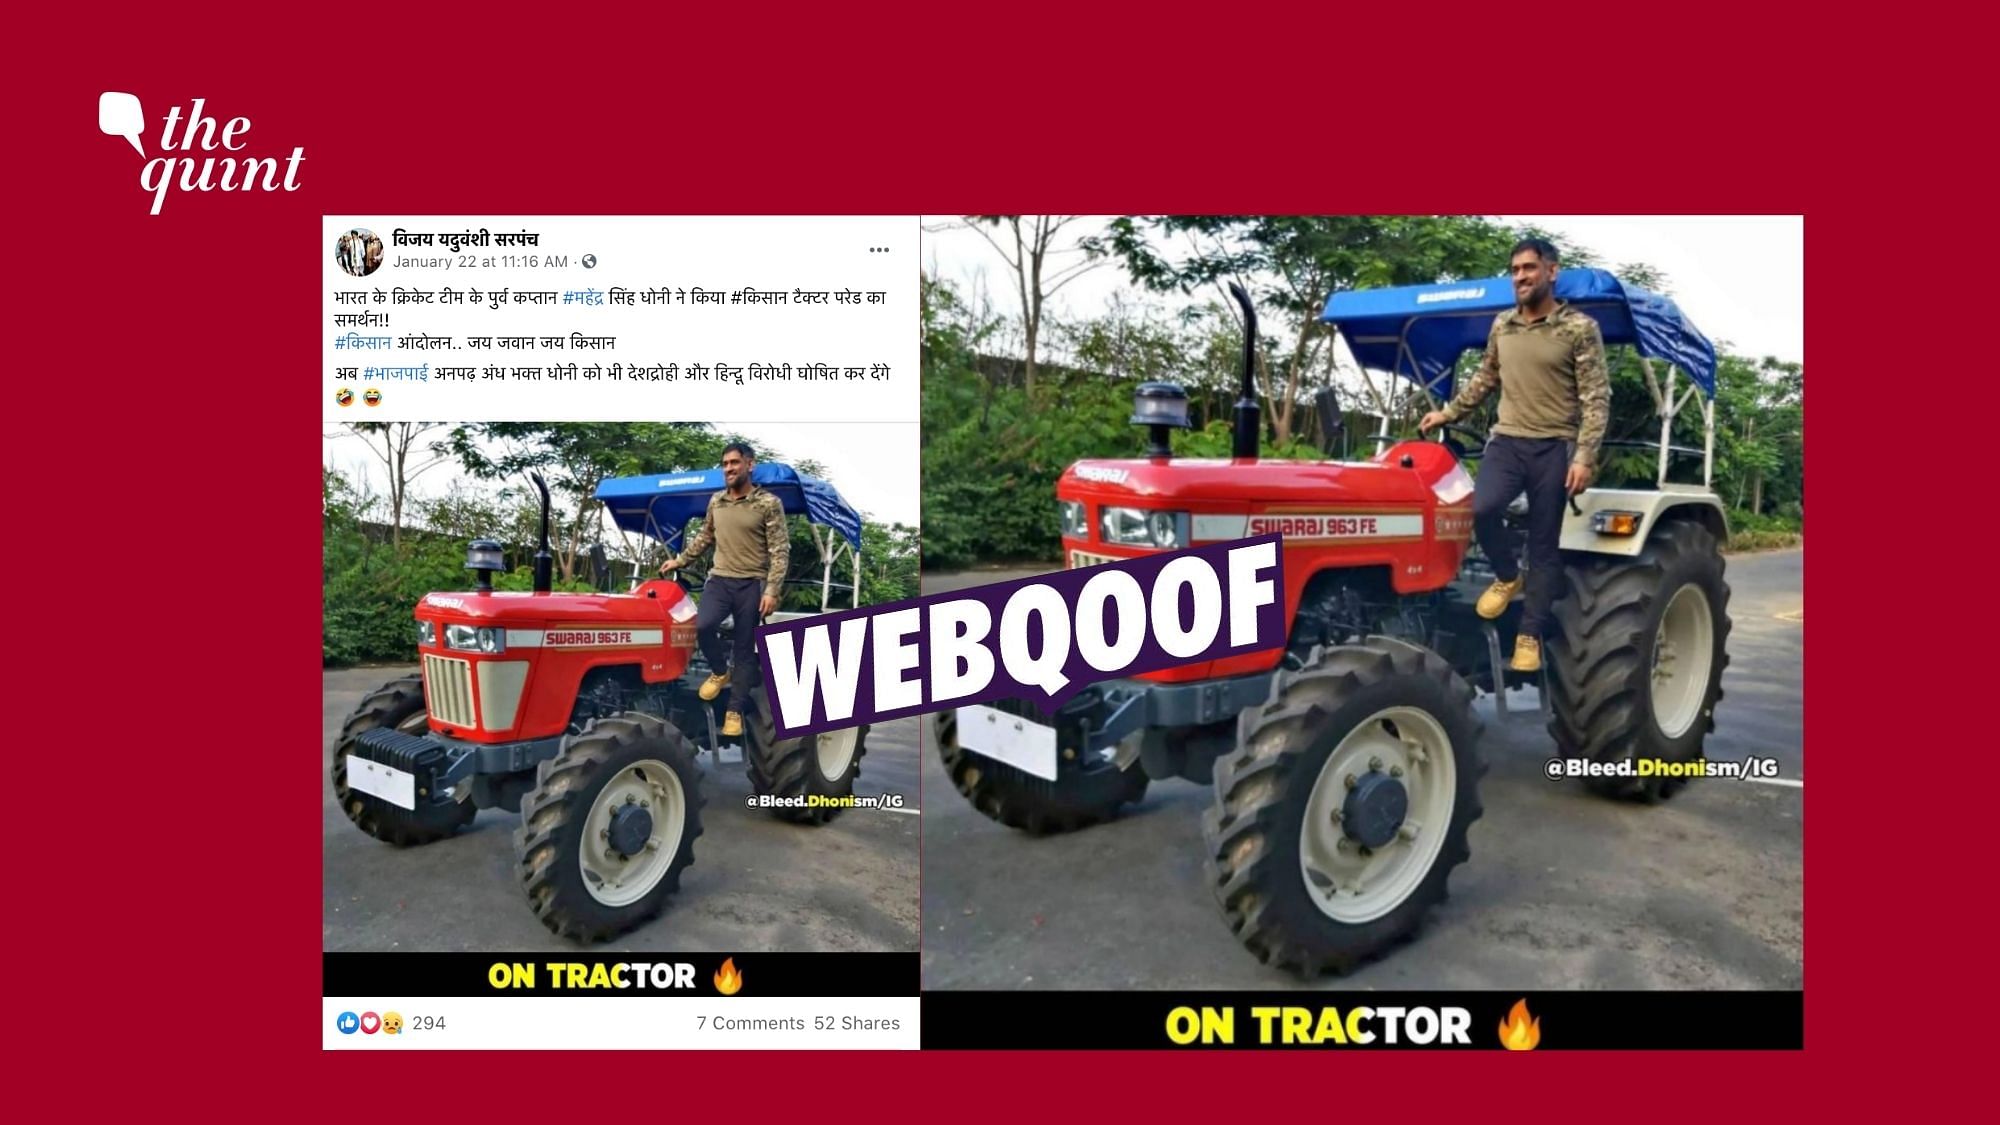 The image of MS Dhoni on a tractor is from June 2020 and is not related to the ongoing farmers’ protests.